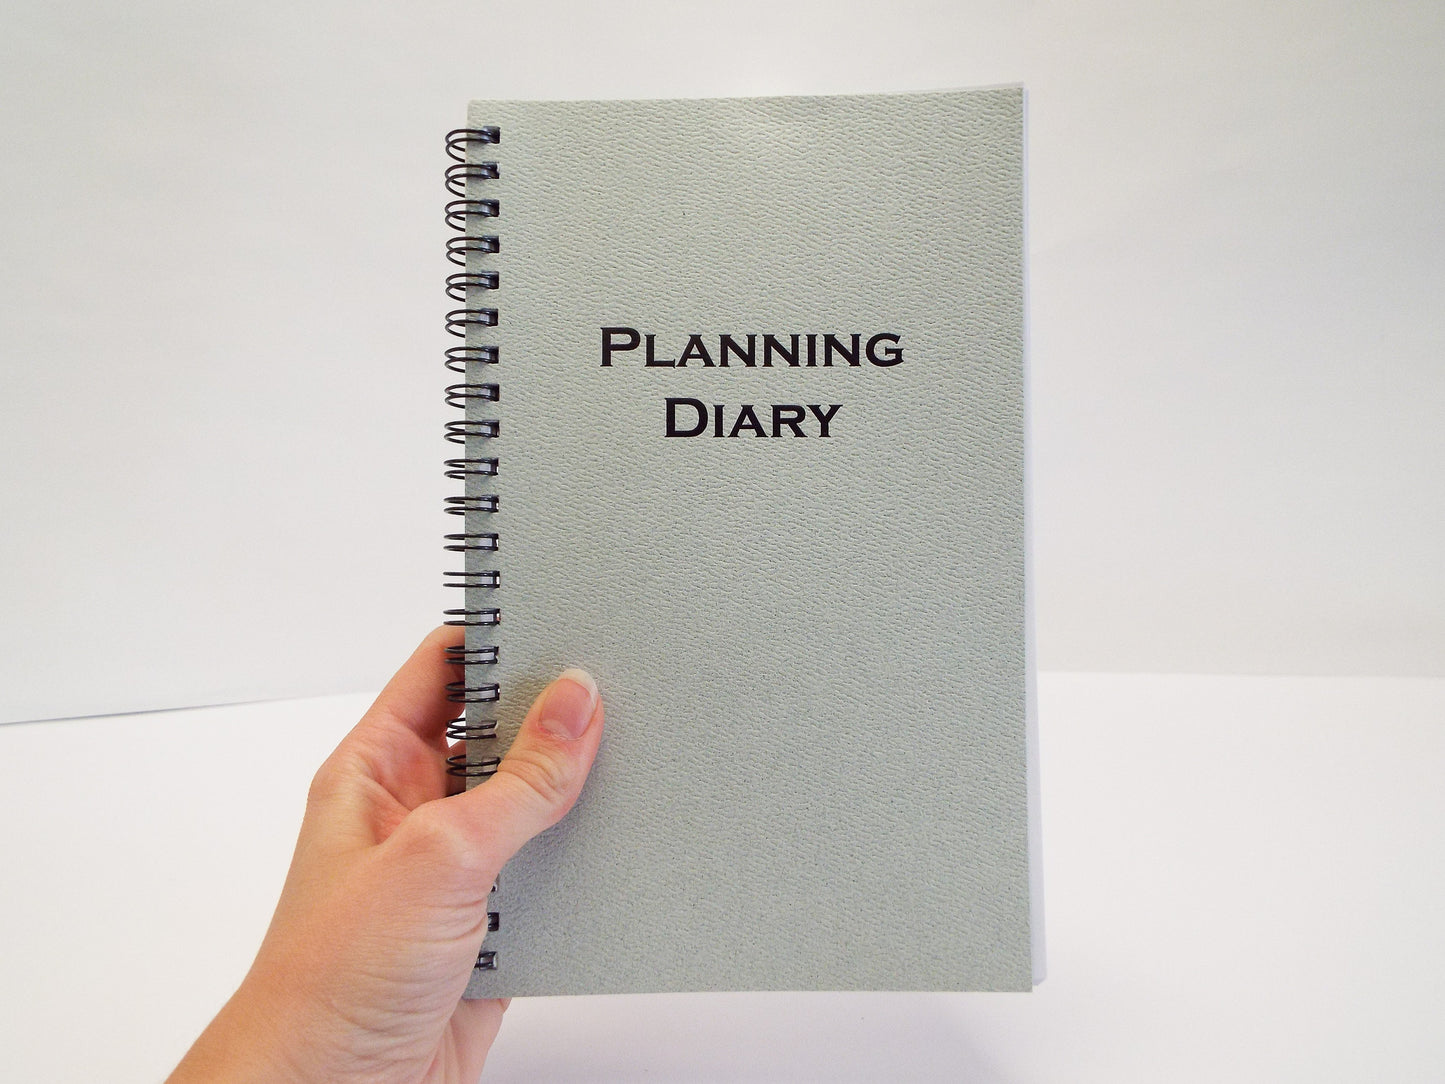 Preference Collection 5 x 8 Wirebound Planner: PD85WI - REFILL SERVICES –  Refill Services